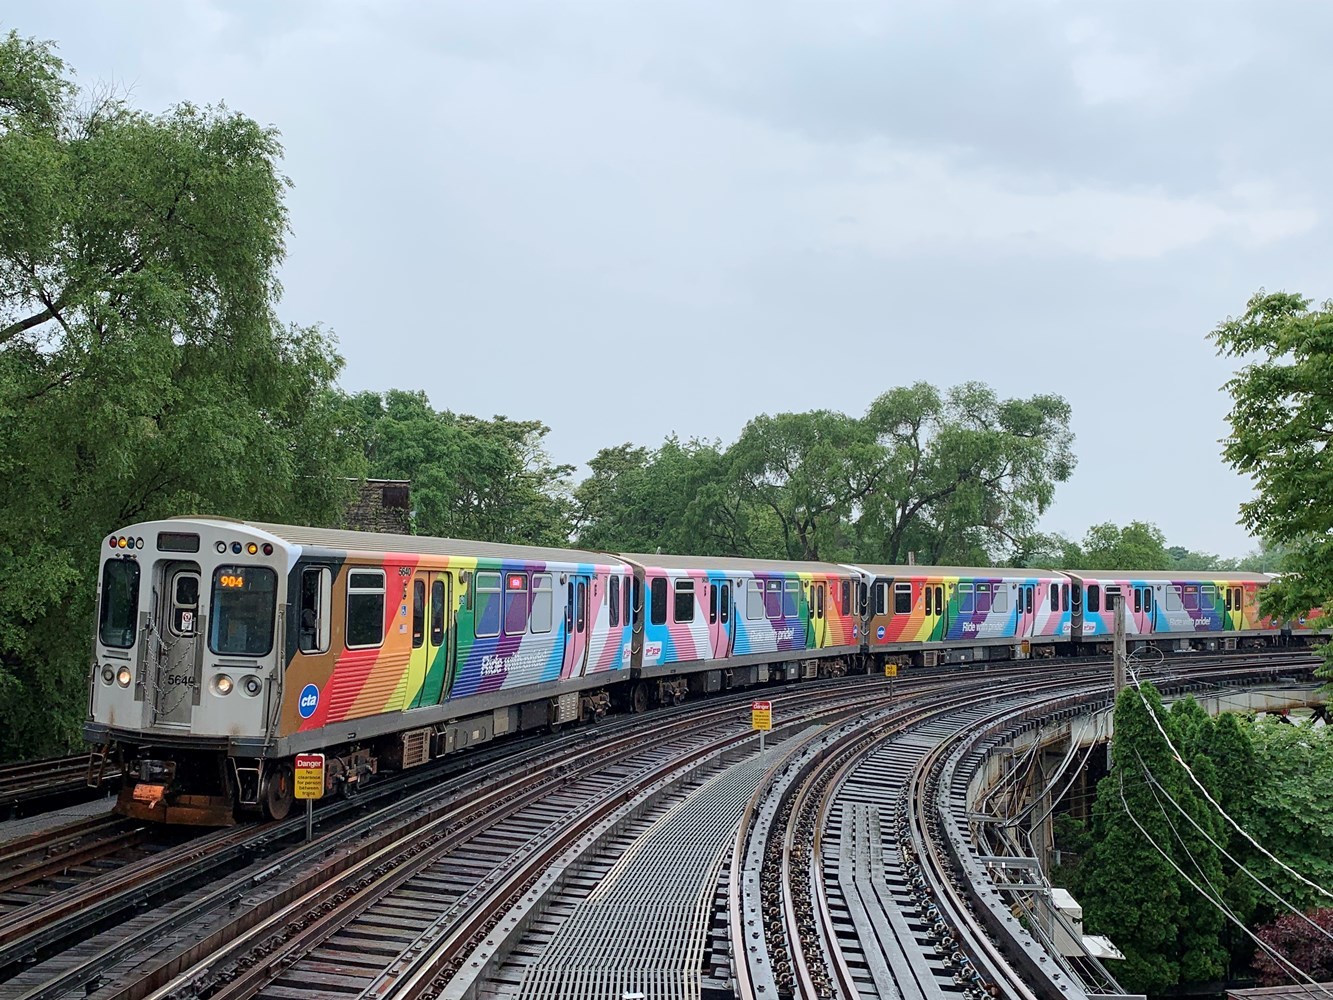 The 2022 CTA Pride Train, featuring a new wrap on all eight railcars, as it approaches the Sheridan Red Line station